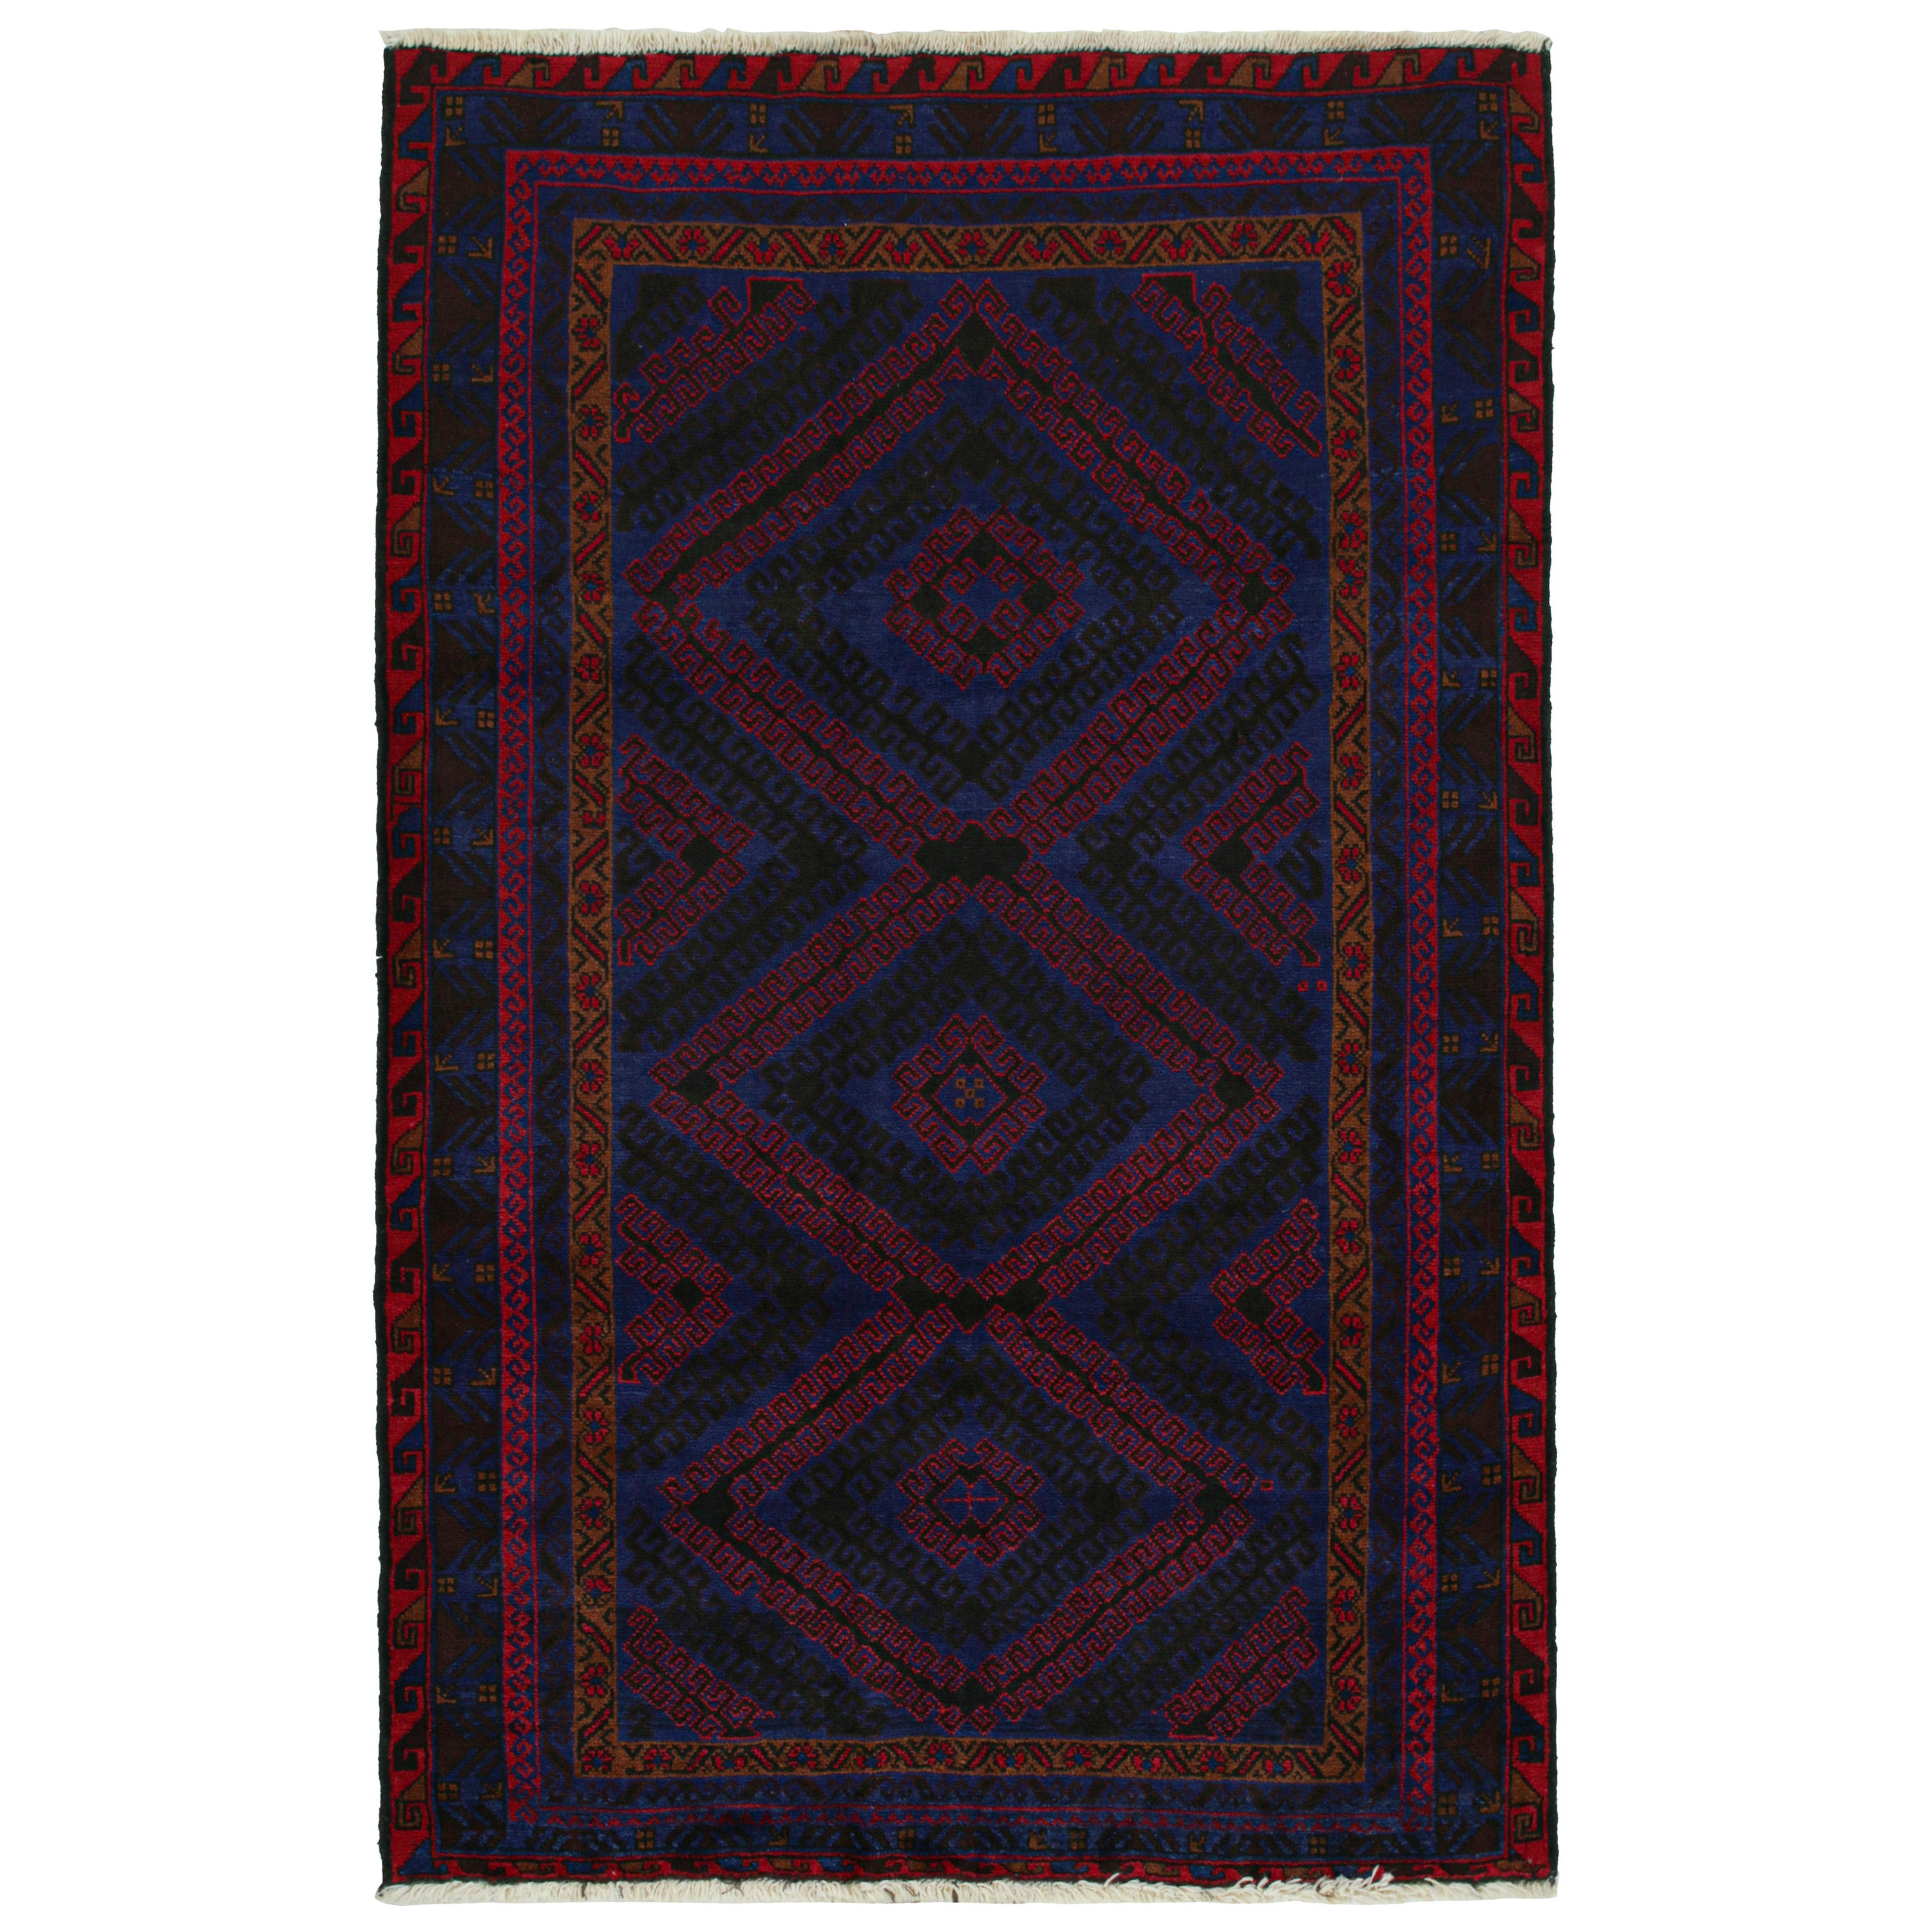 Vintage Baluch Tribal Rug in Red & Blue Geometric Pattern, from Rug & Kilim